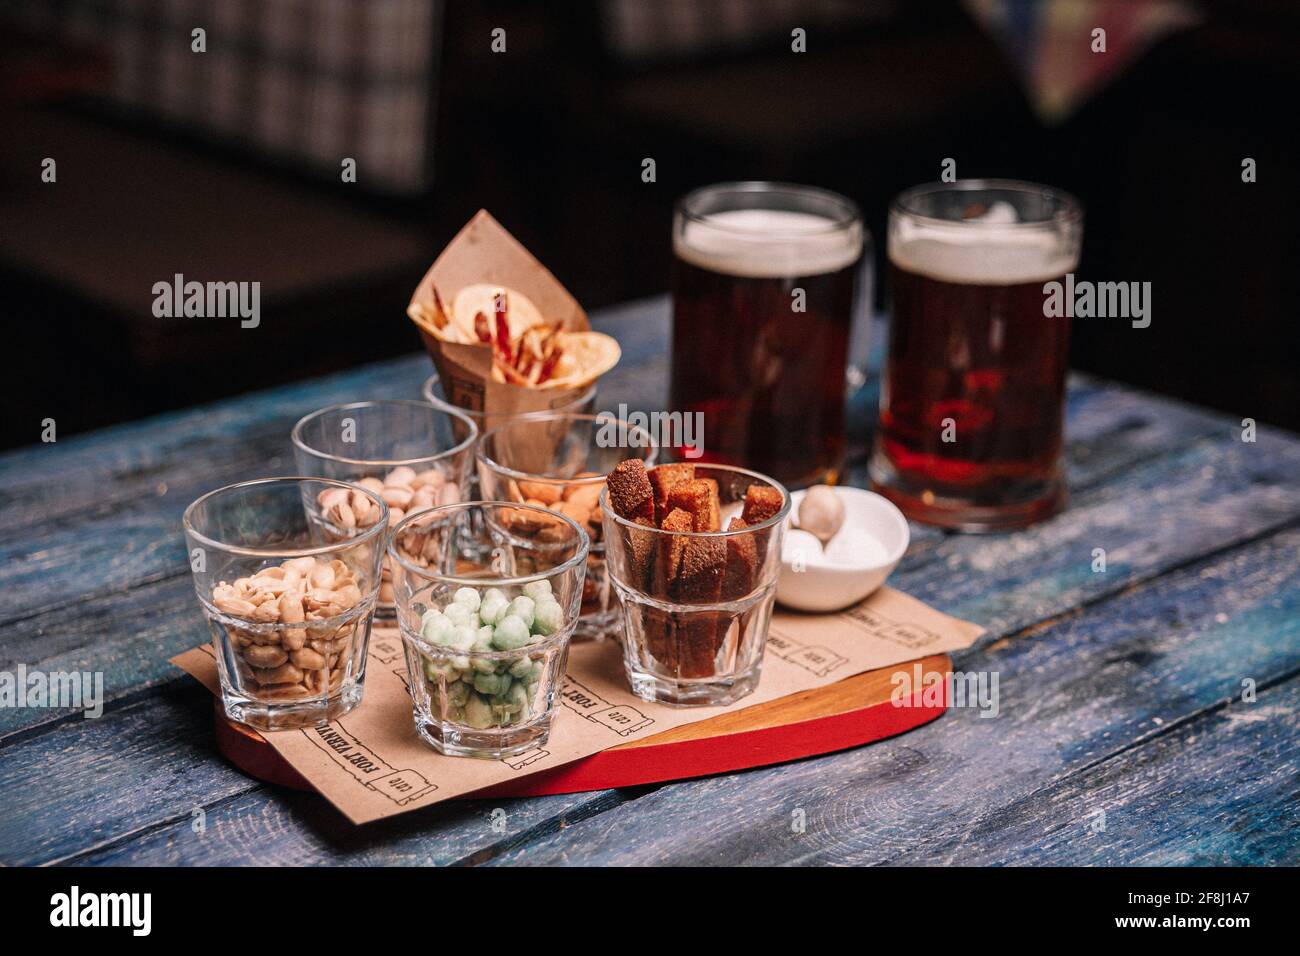 snacks to beer in glass glasses on a wooden table. Stock Photo